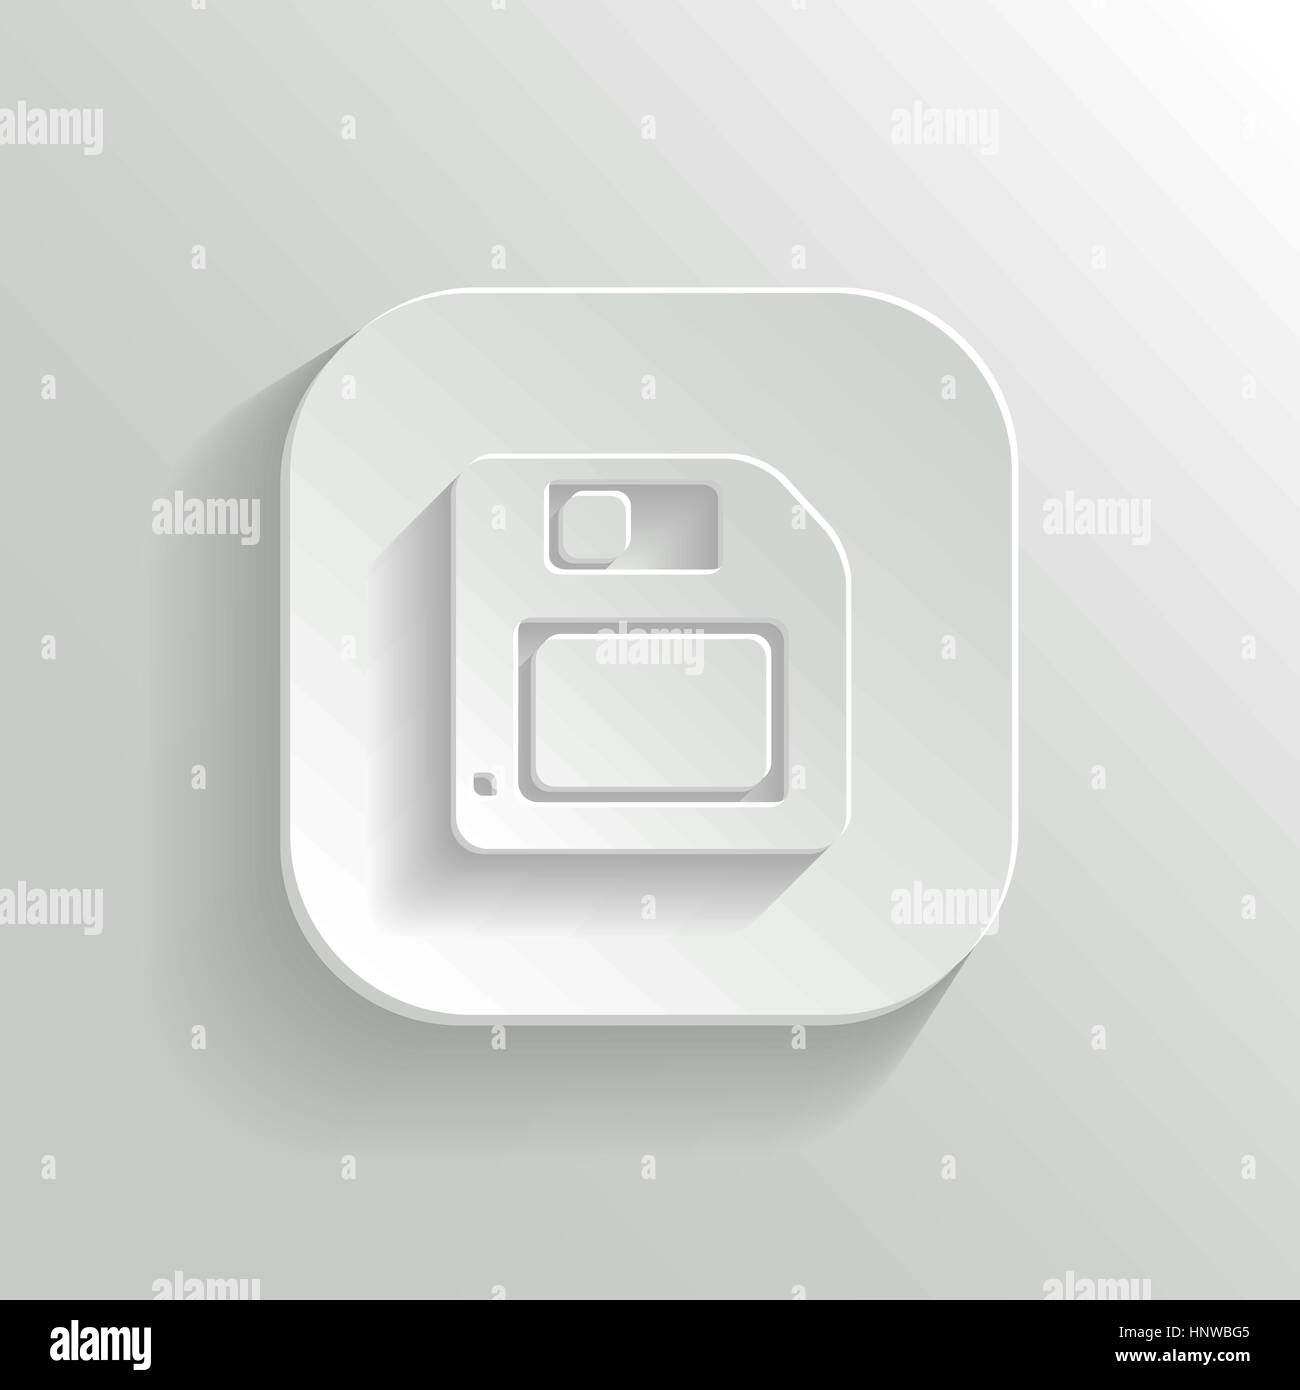 Floppy diskette icon - vector white app button with shadow Stock Vector